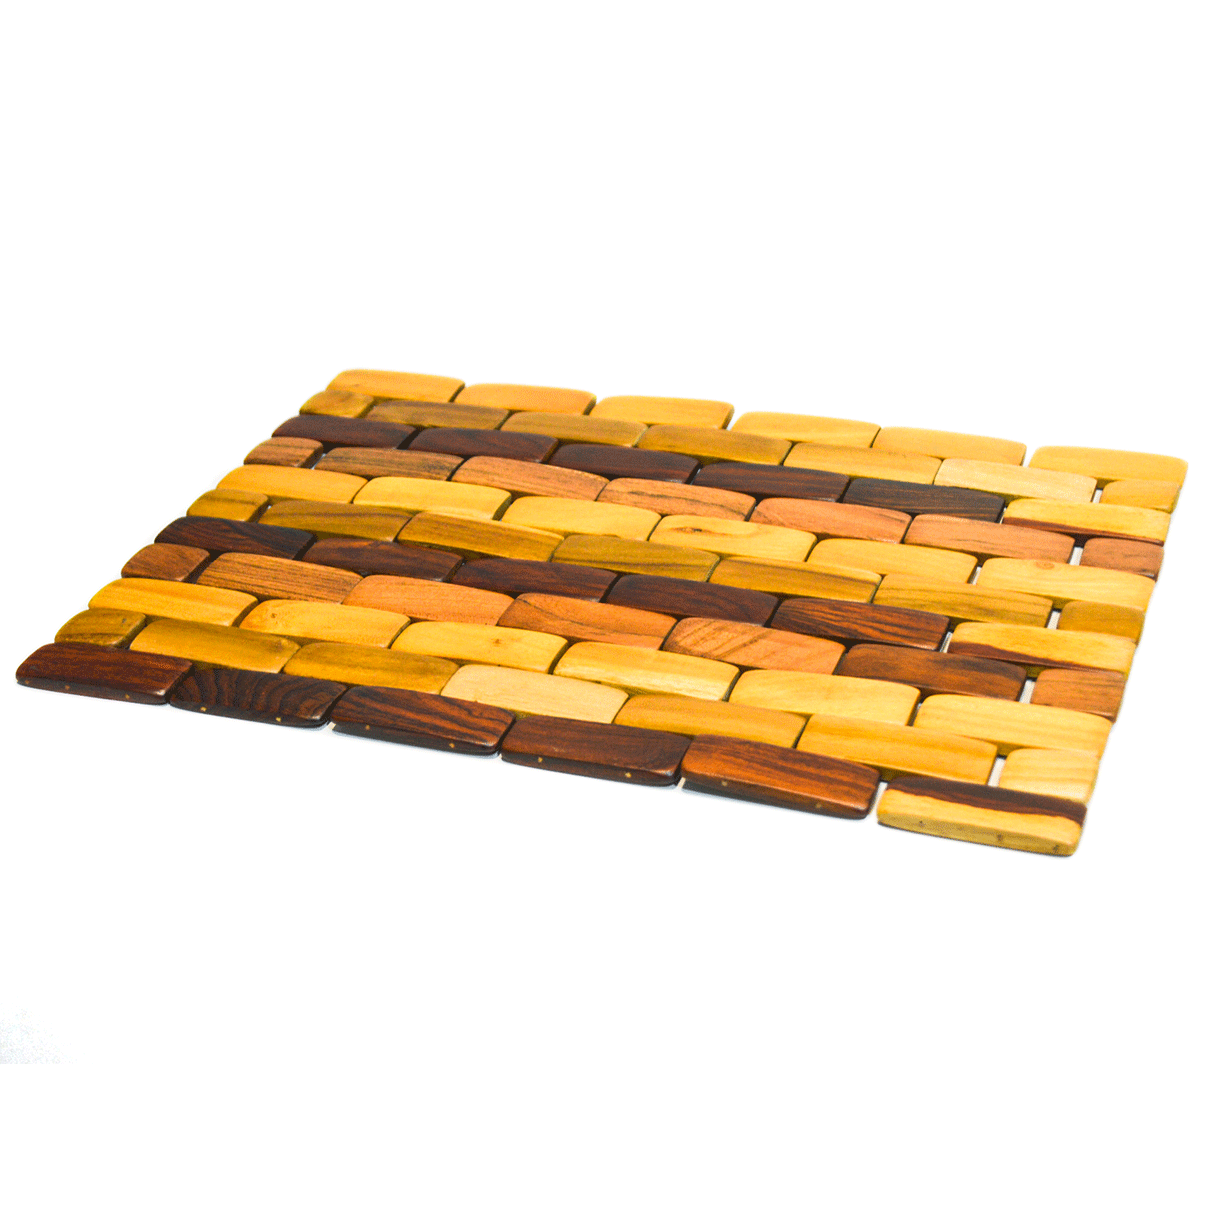 2 Costa Rica Wood Placemats - Shipping INCLUDED